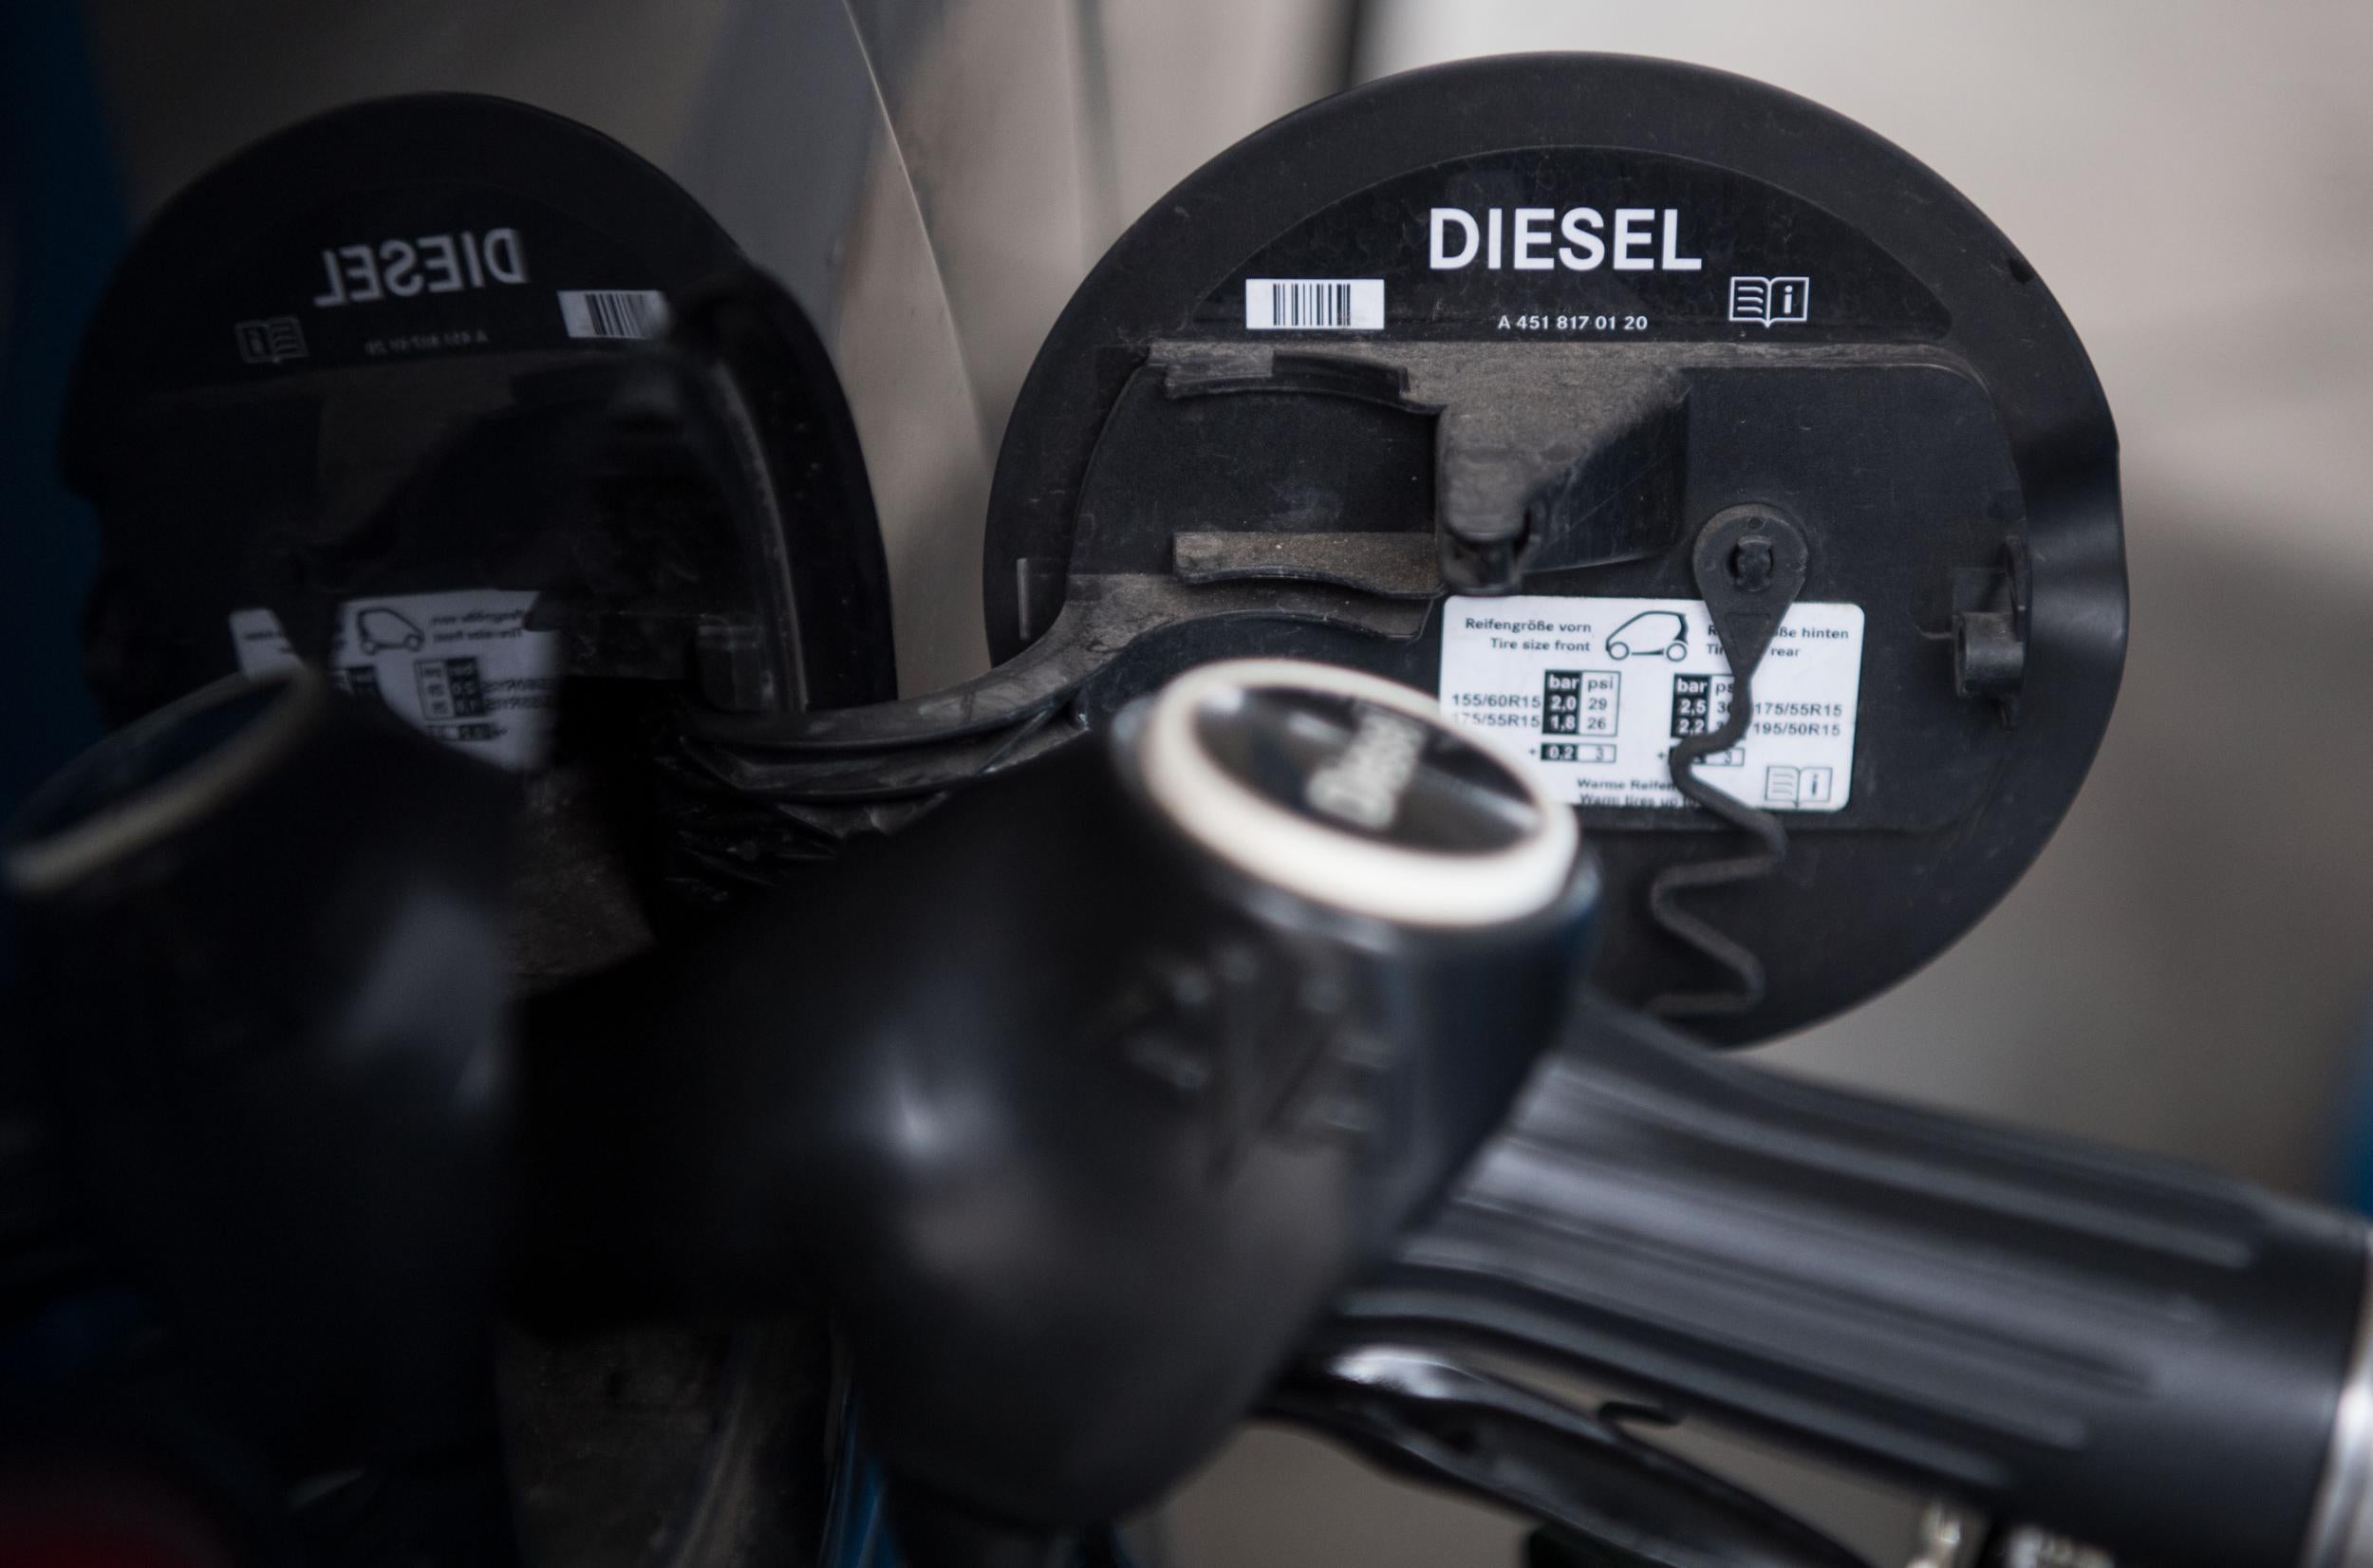 Buyers may be deterred from diesel cars after the government set a future date to ban them